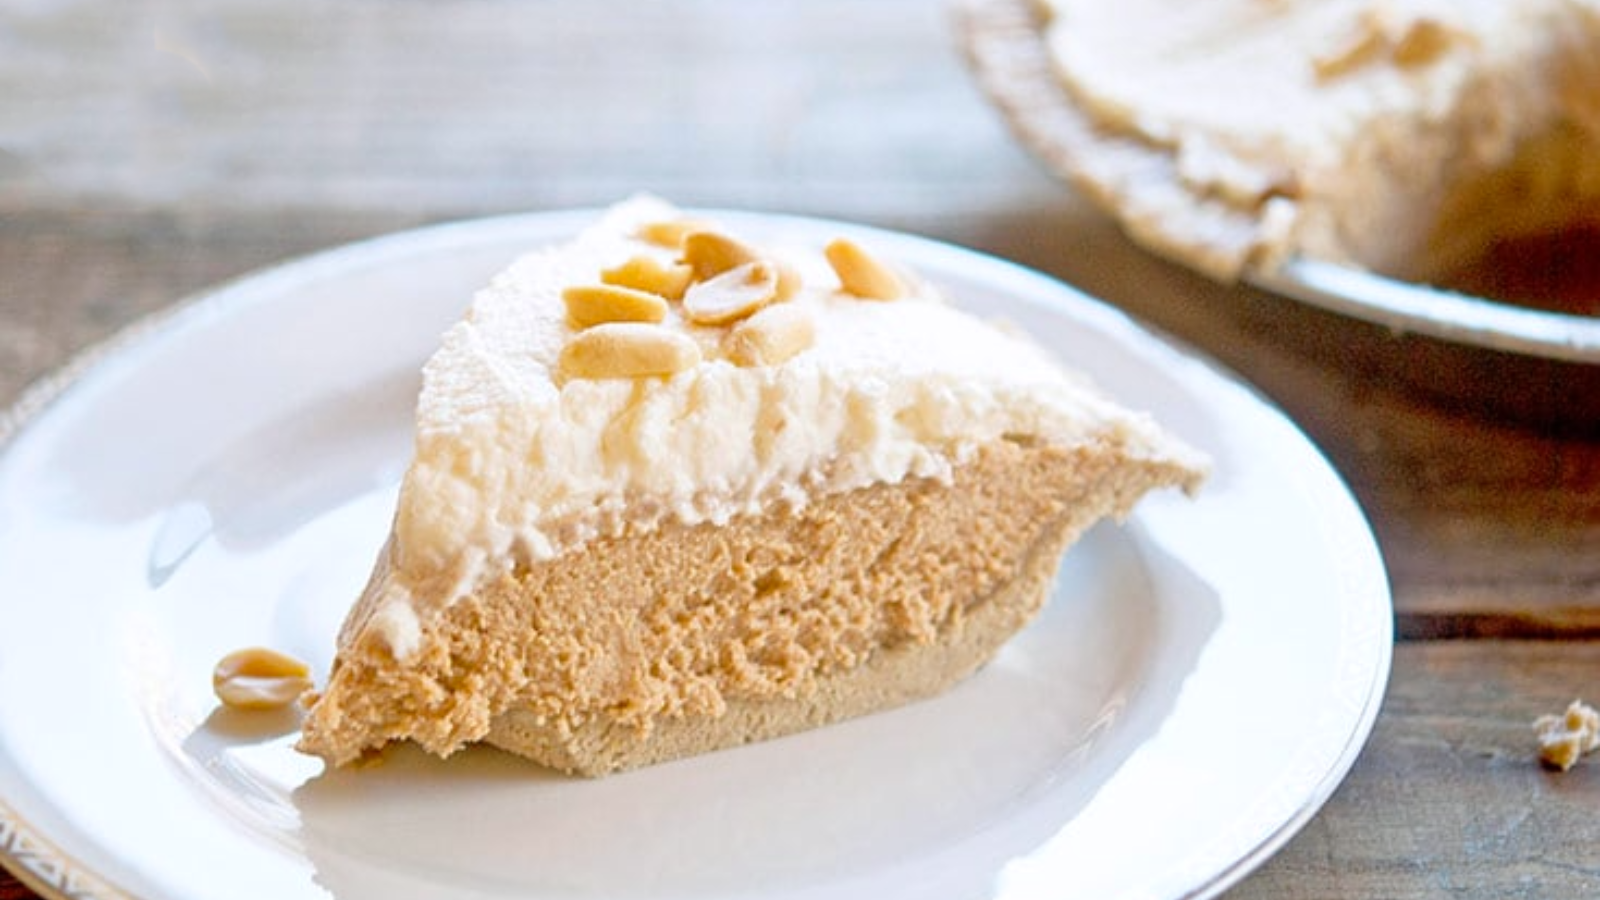 A slice of peanut butter pie on a white plate.